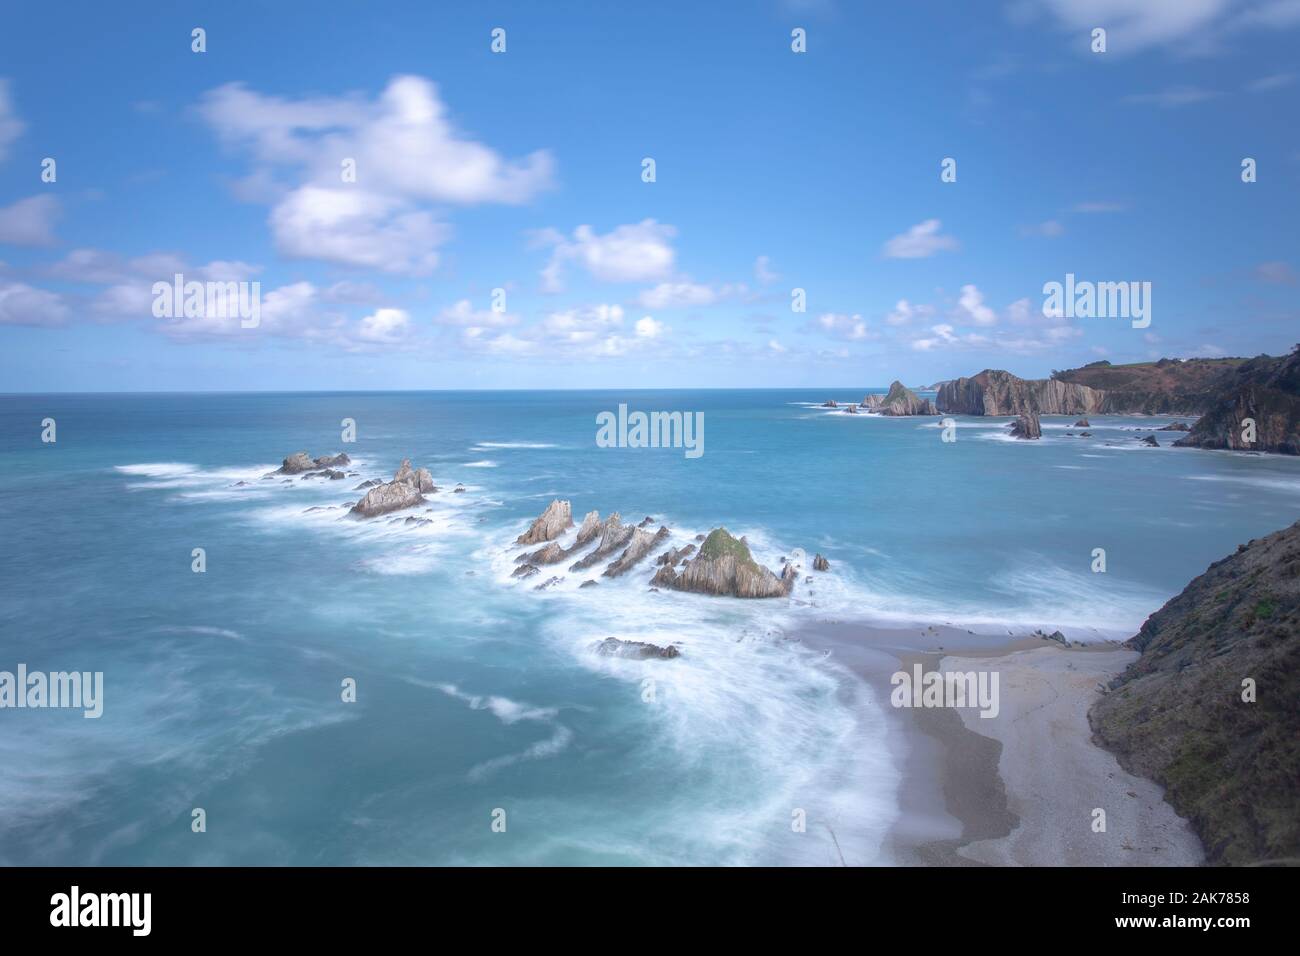 Long exposure landscape photography of a beach on the coast of Asturias, province of northern Spain Stock Photo